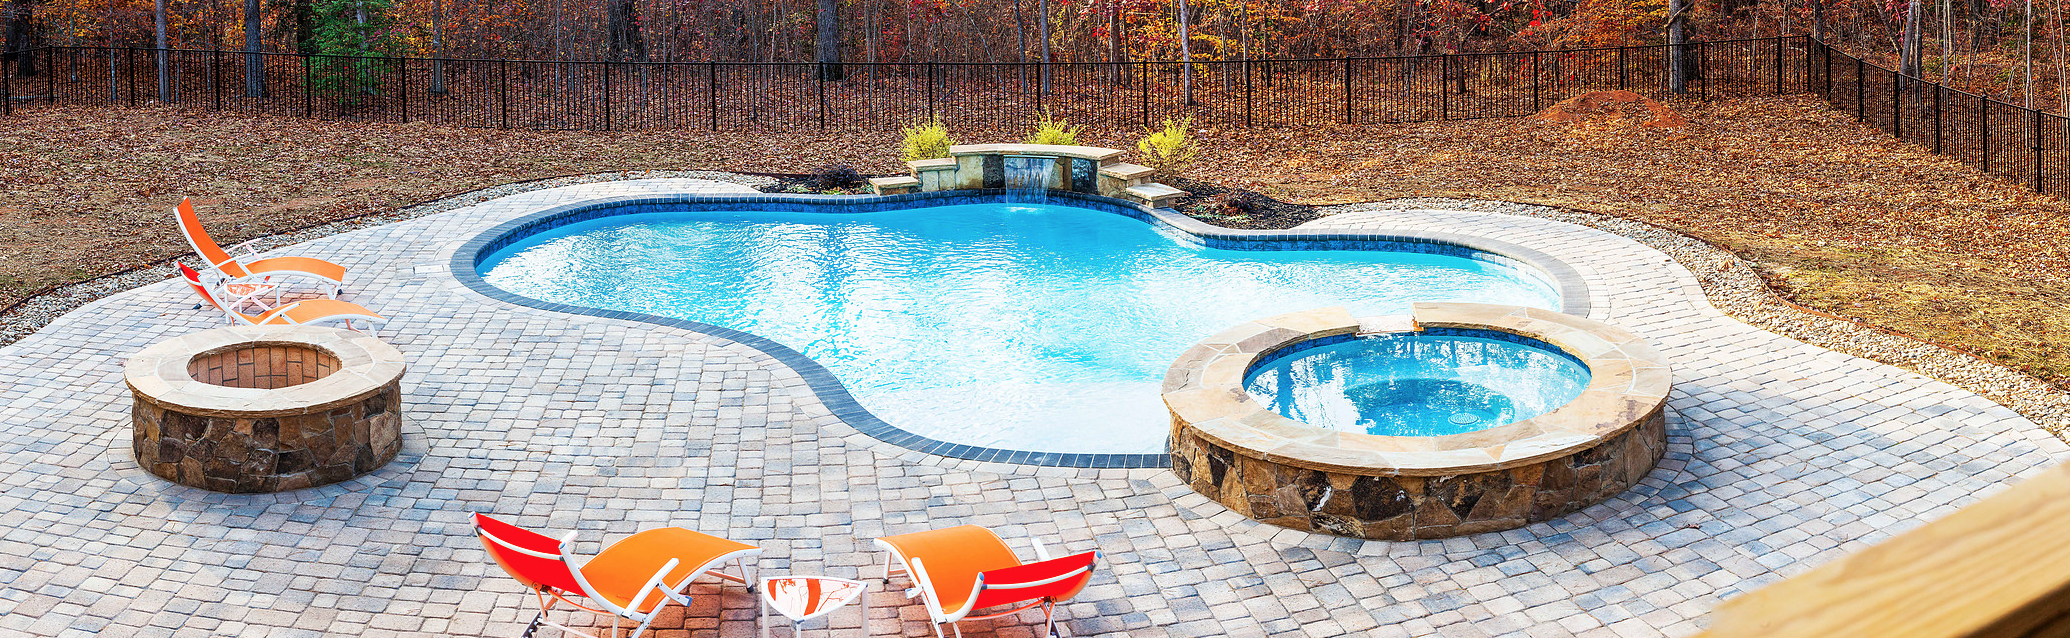 Custom Inground Concrete Pools Installed in Hickory North Carolina Call CPC Pools at 704-799-5236